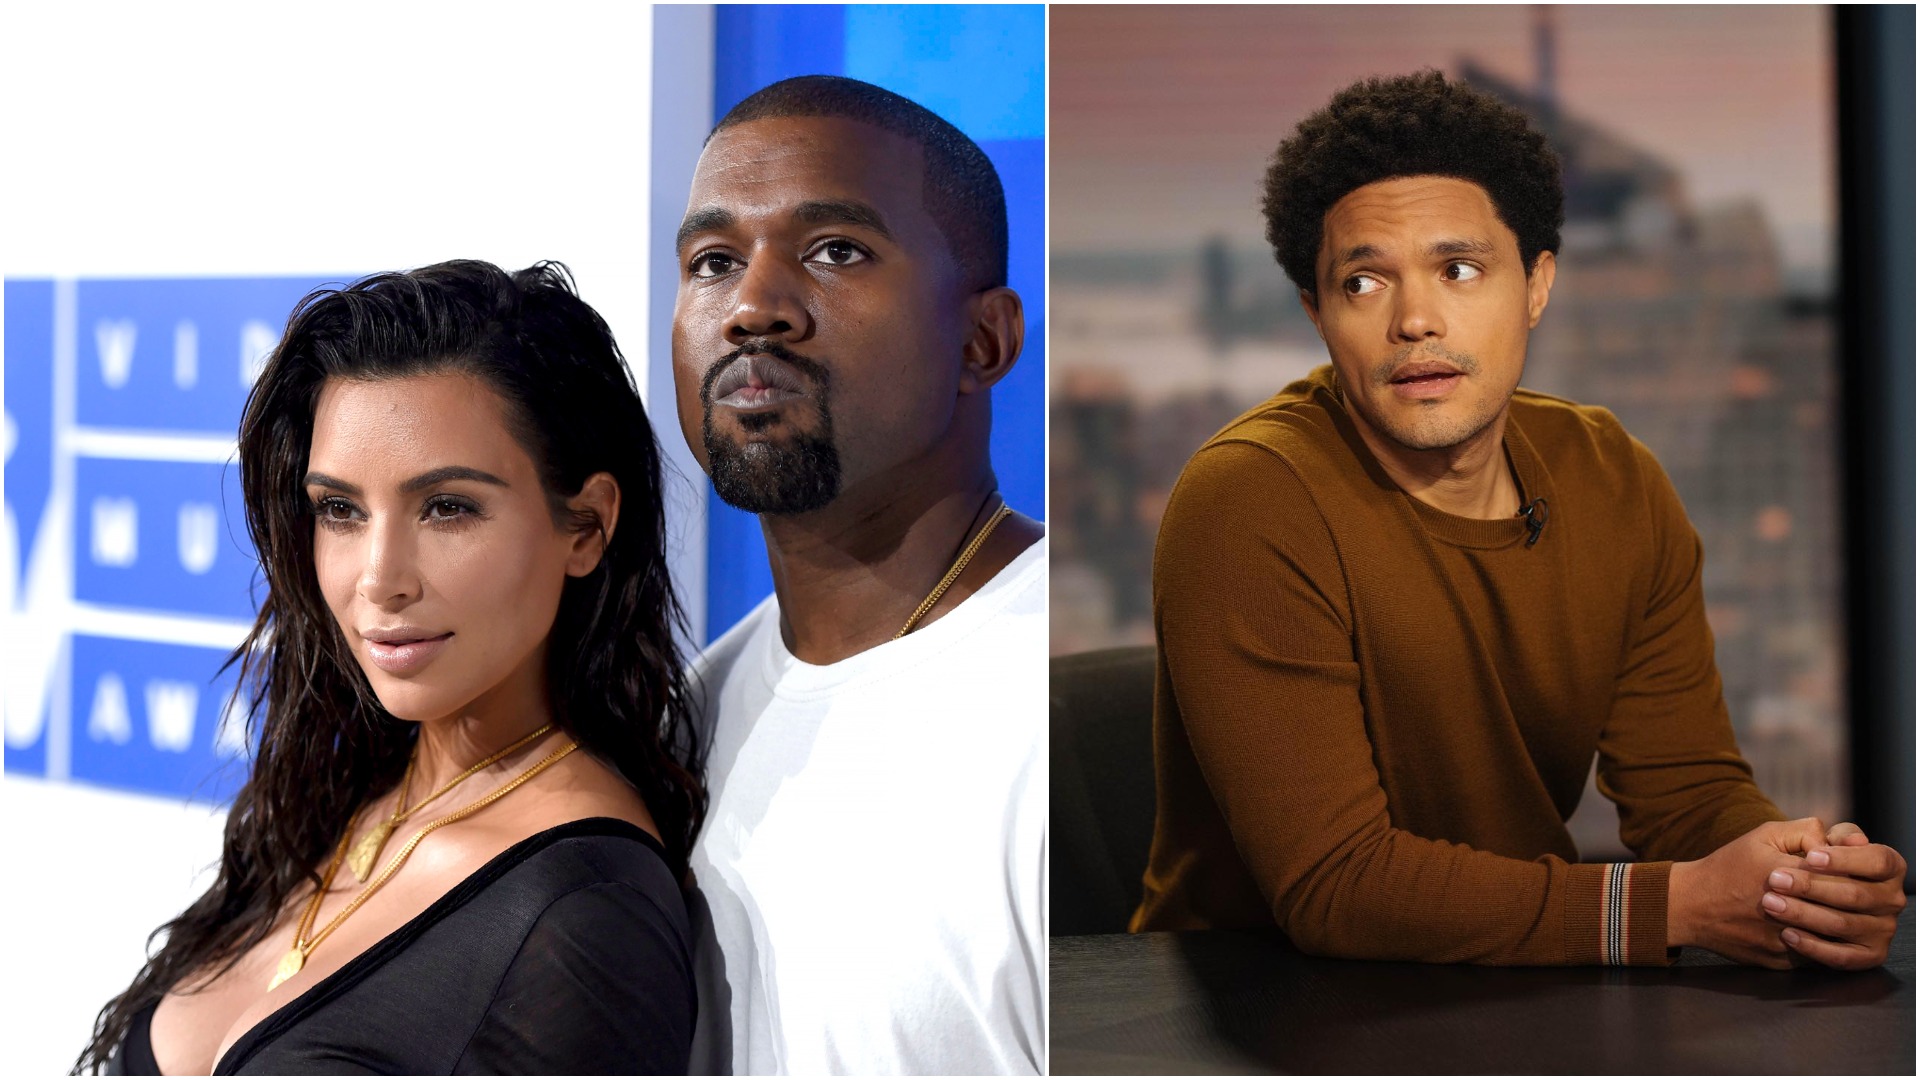 Kanye West Scrapped Off From The Grammy Awards Performance Line-Up After Racially Abusing Trevor Noah